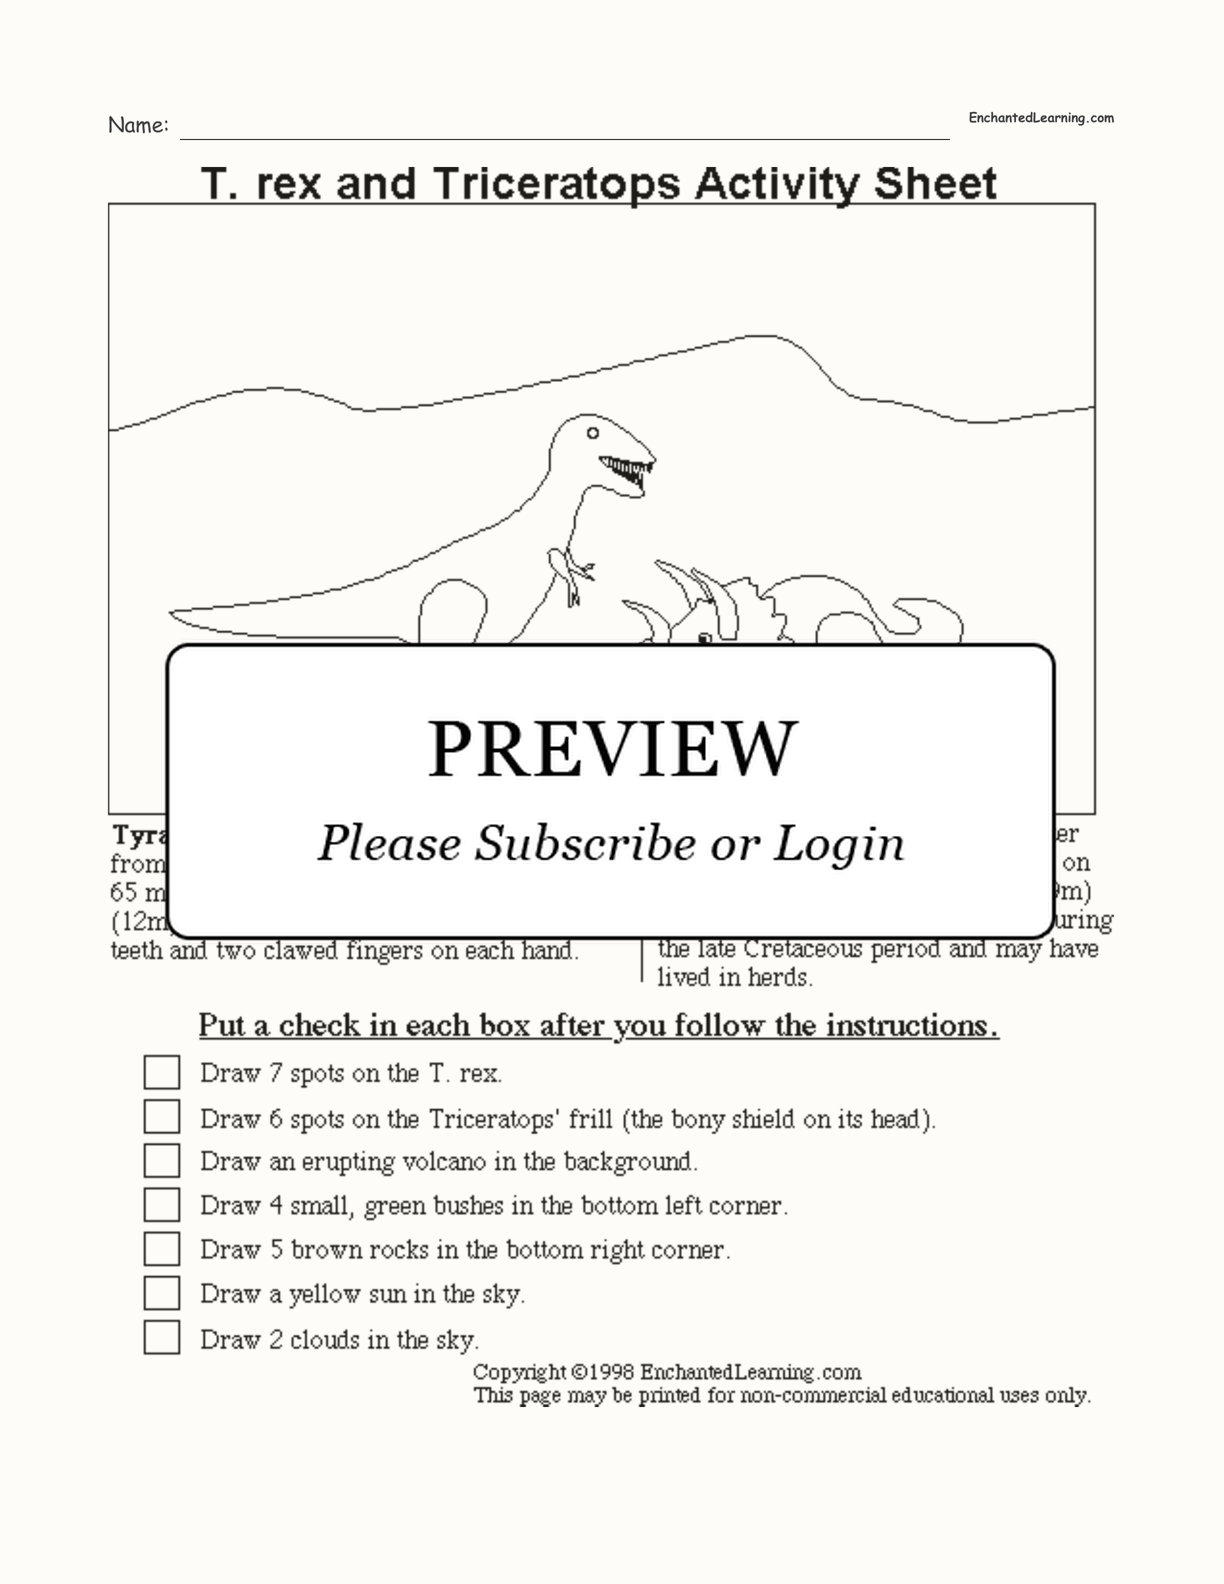 T. rex and Triceratops Follow the Instructions Worksheet interactive worksheet page 1